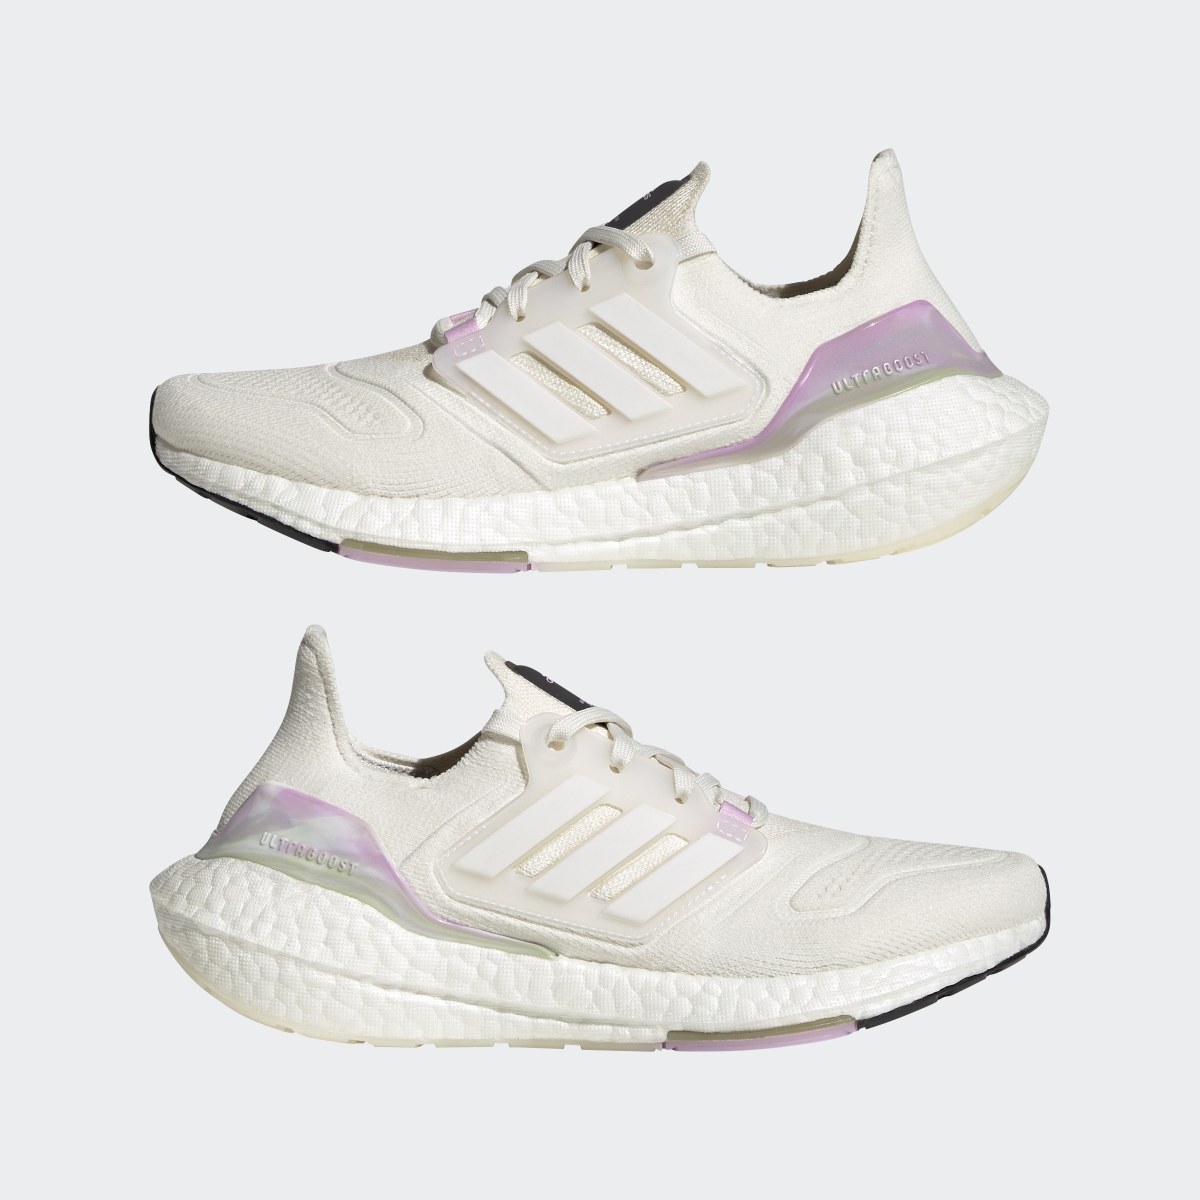 Adidas Scarpe Ultraboost 22 Made With Nature. 11